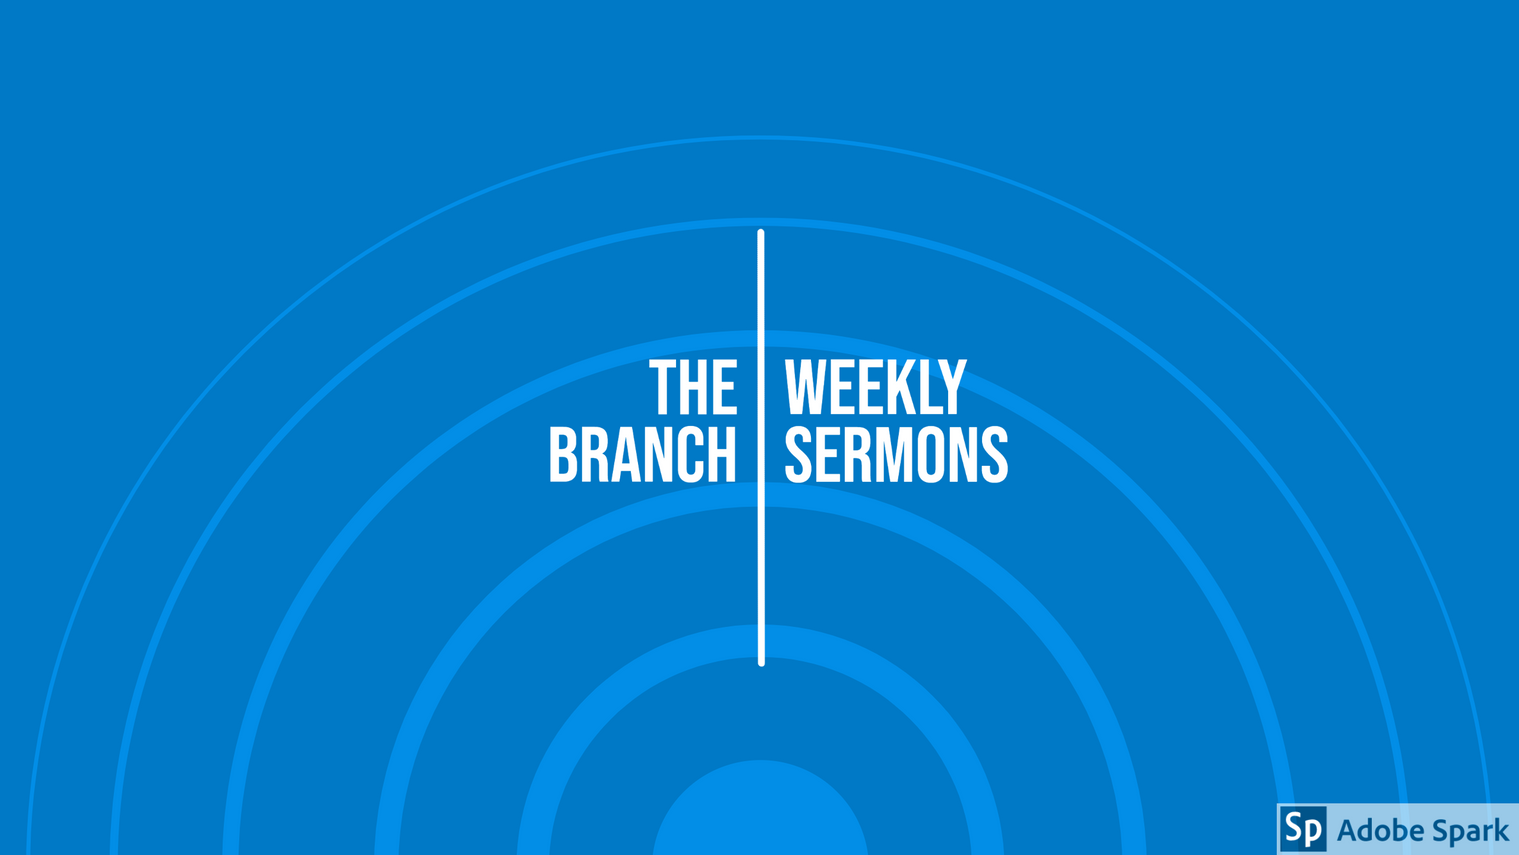 Sermons by the Branch